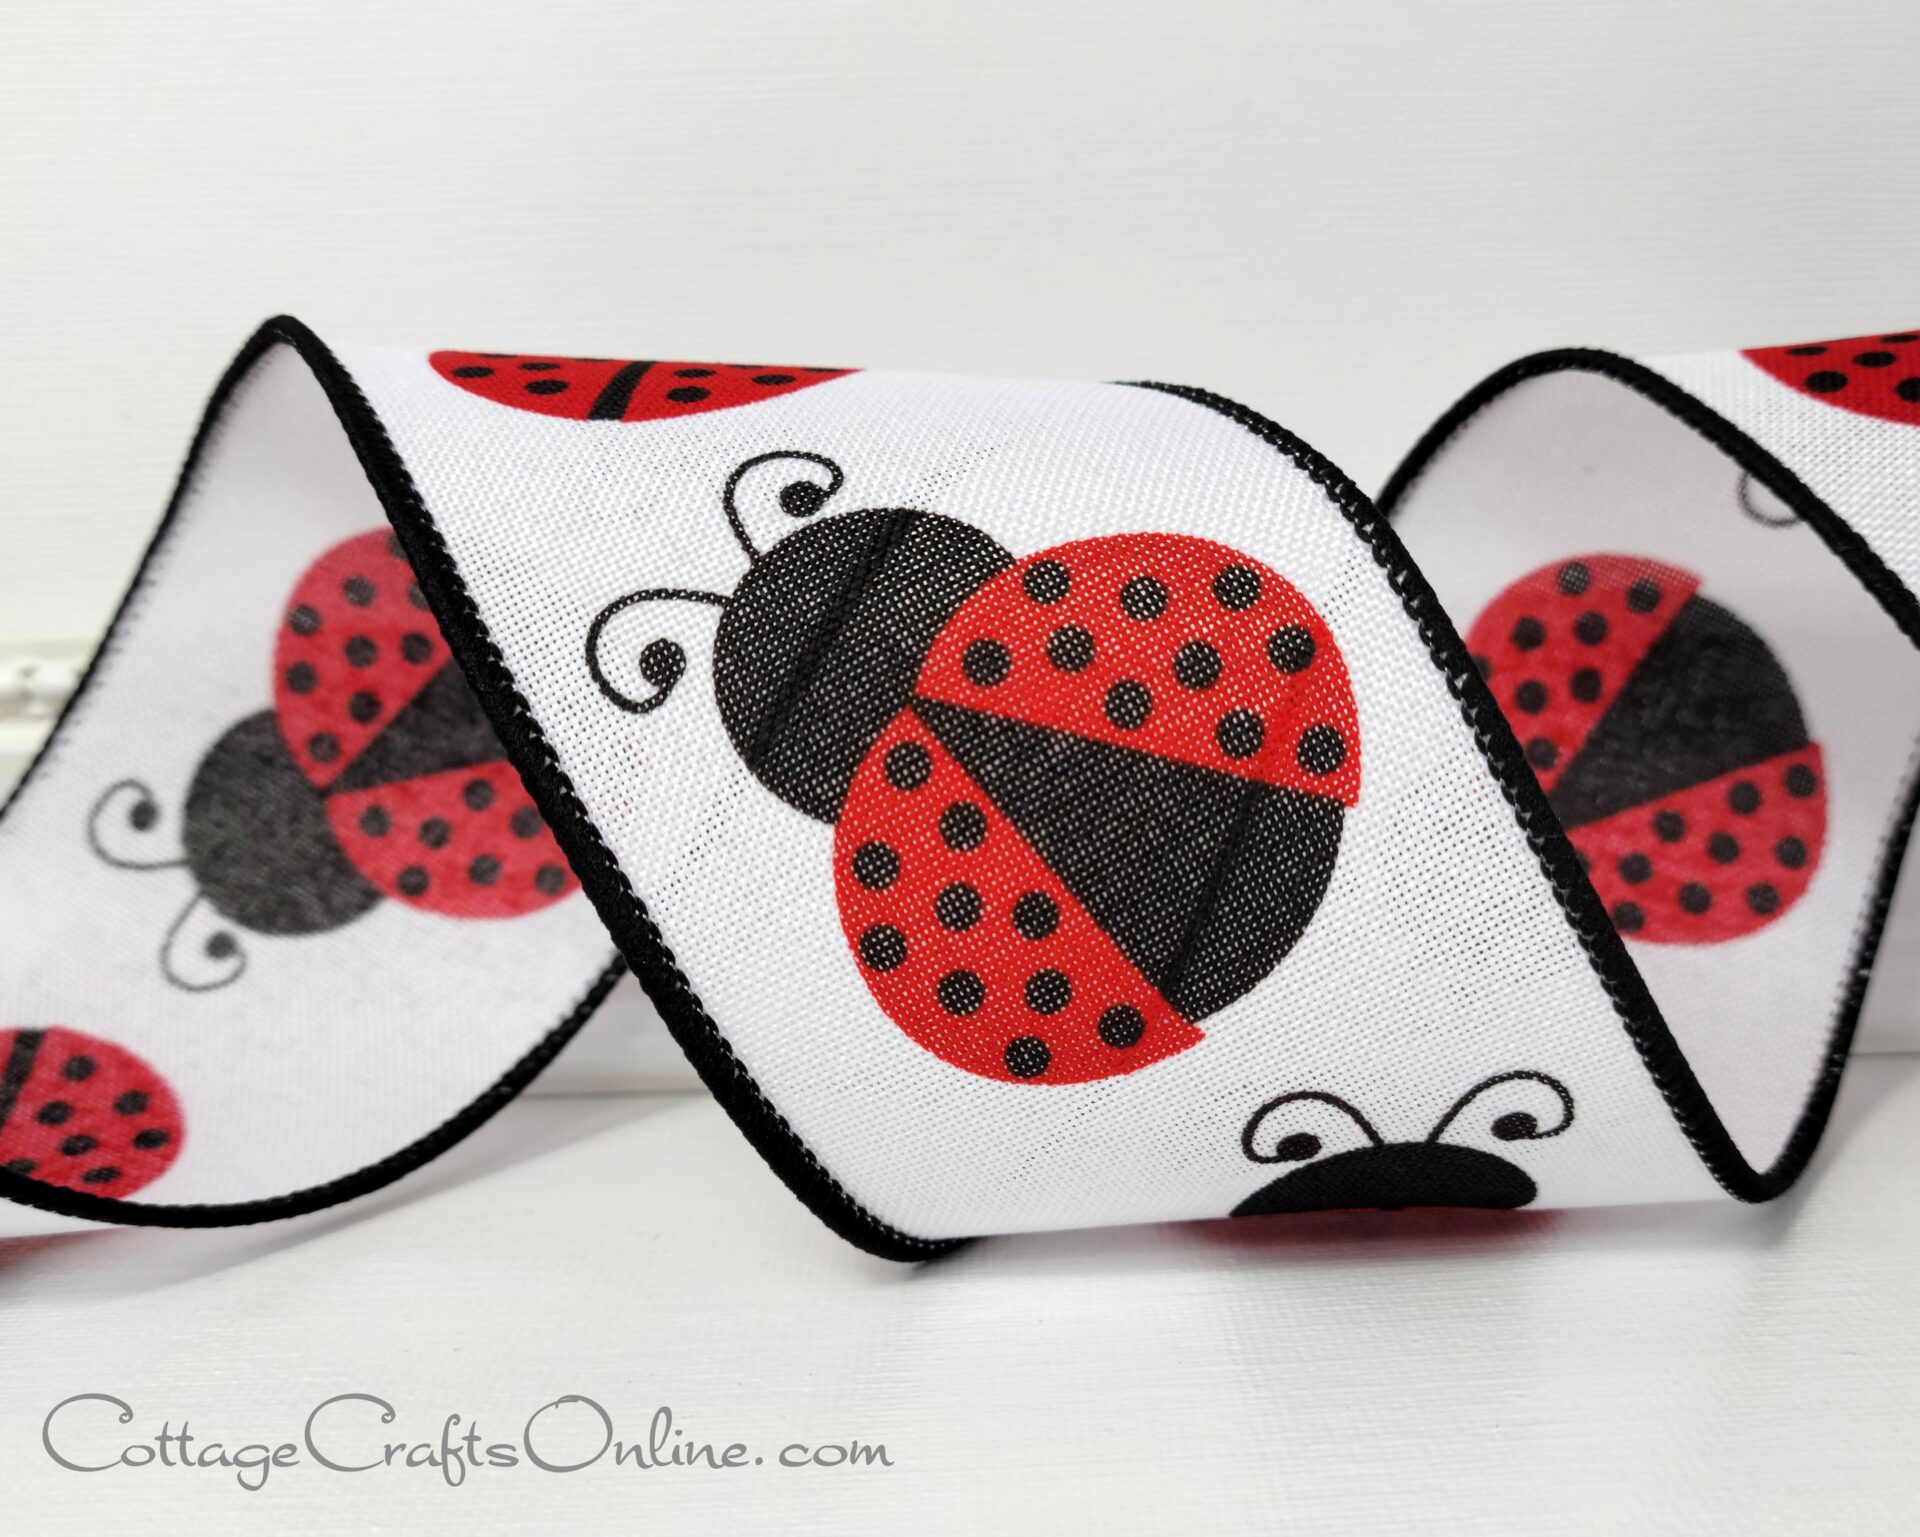 A close up of the ribbon with a ladybug design